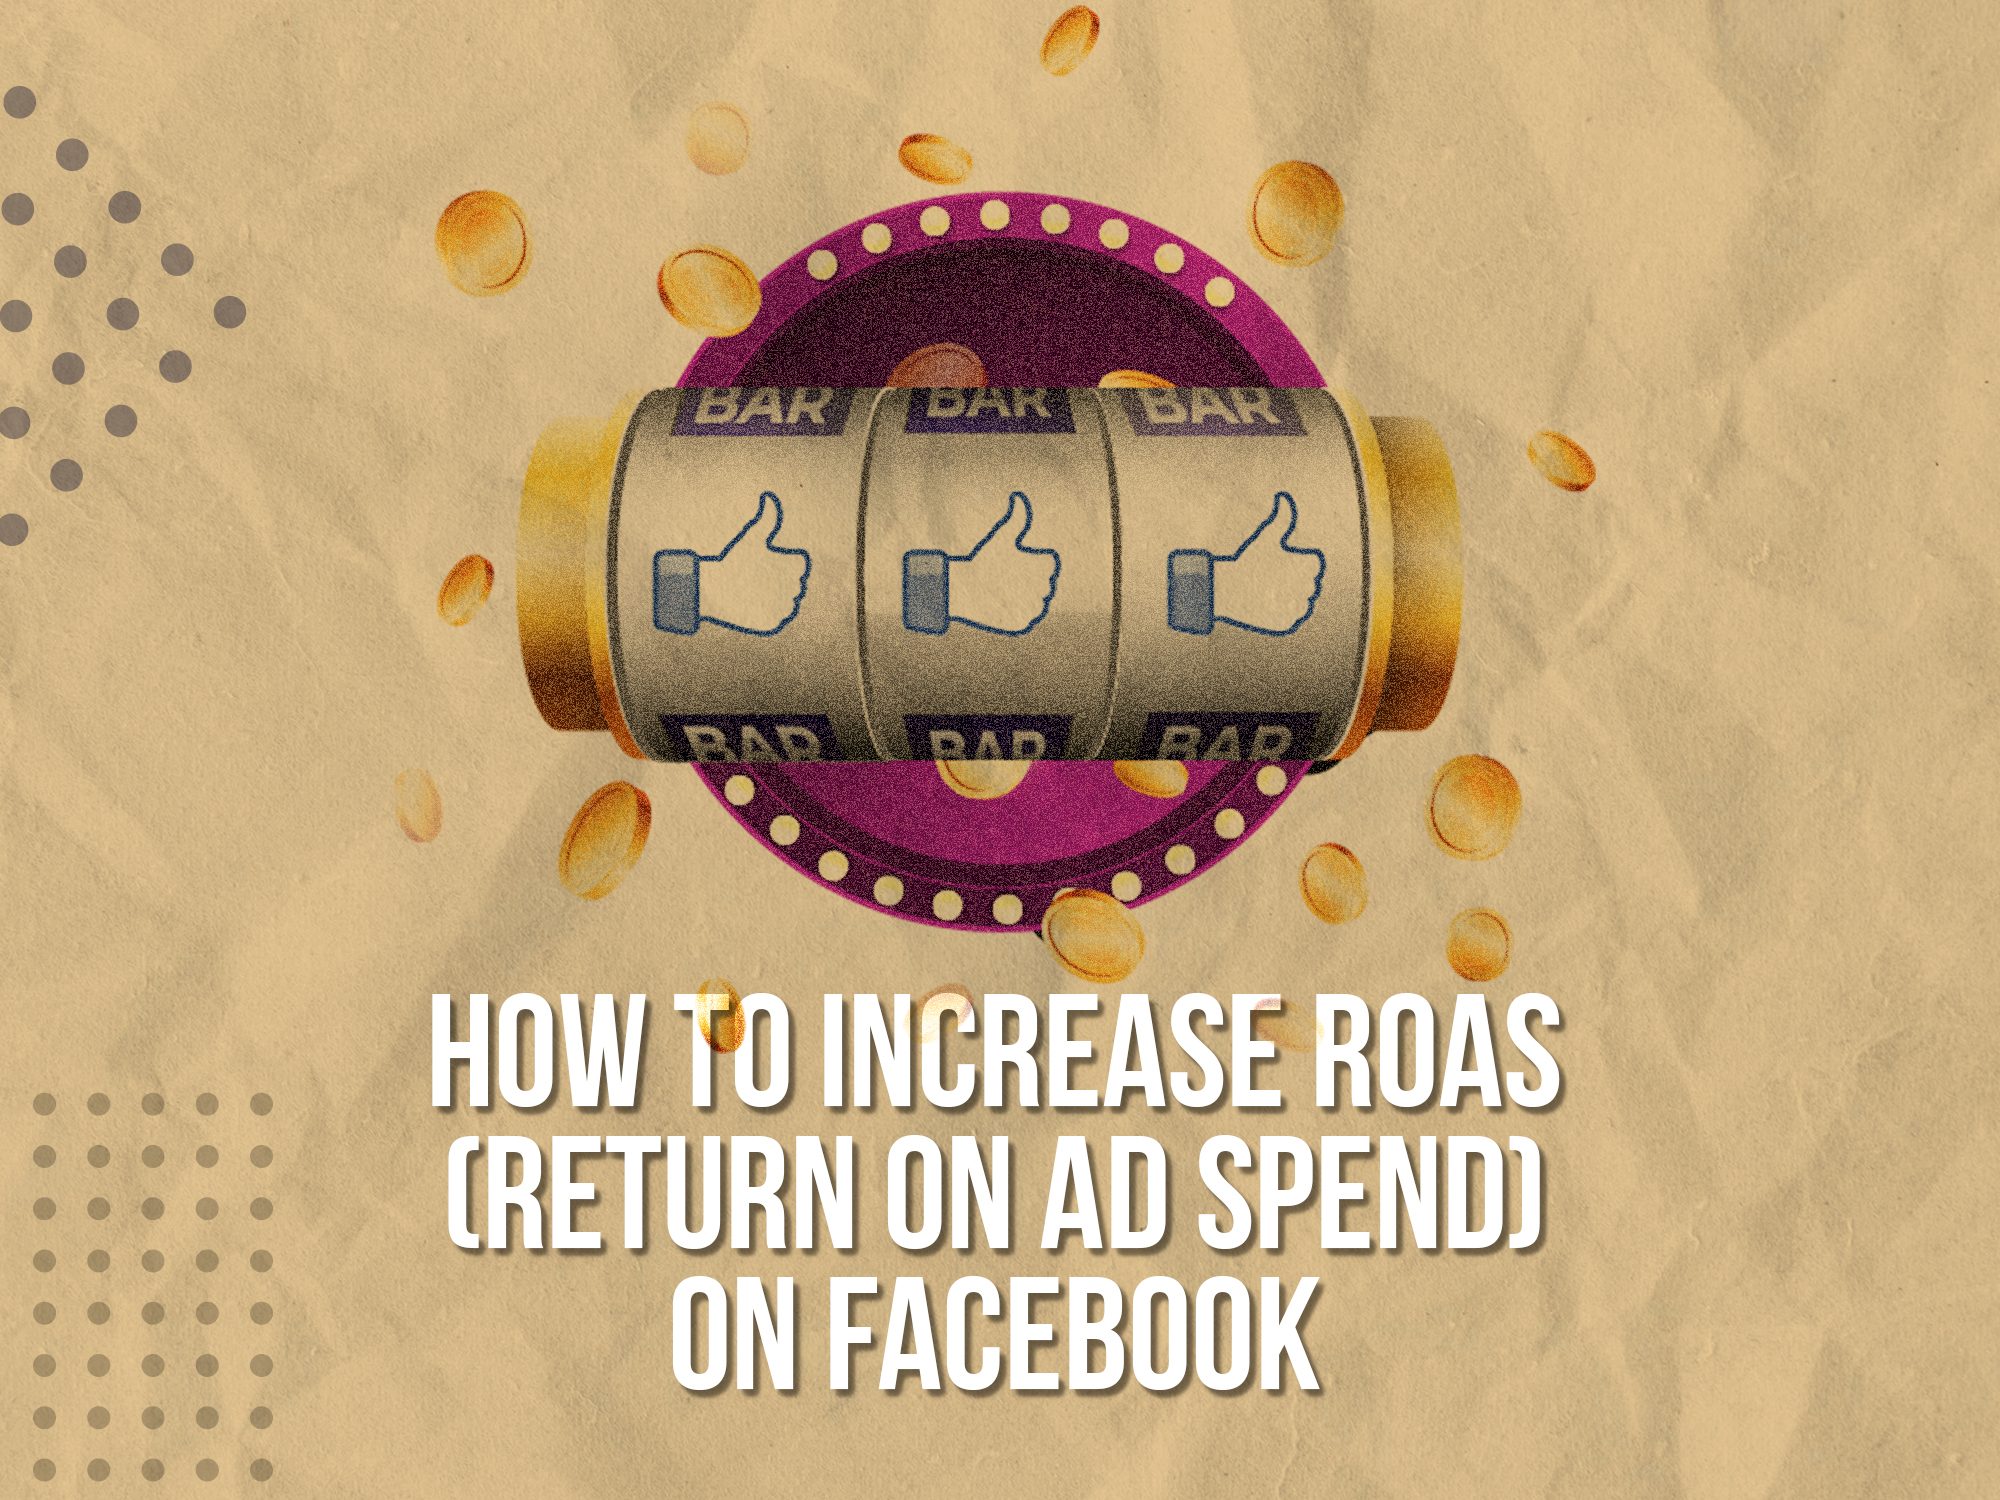 How to increase ROAS (return on ad spend) on Facebook